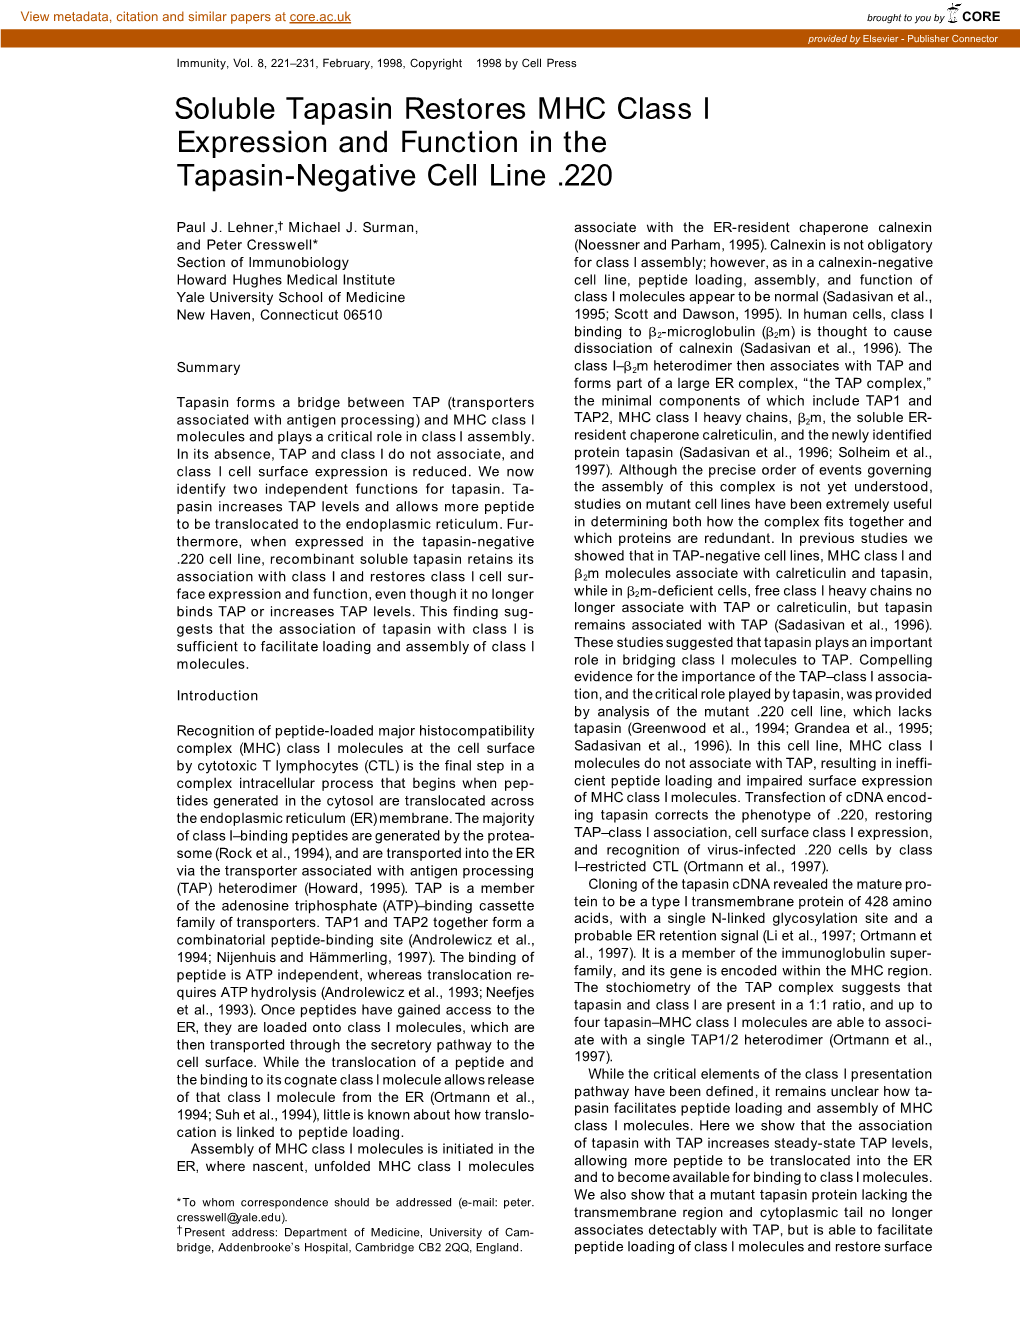 Soluble Tapasin Restores MHC Class I Expression and Function in the Tapasin-Negative Cell Line .220